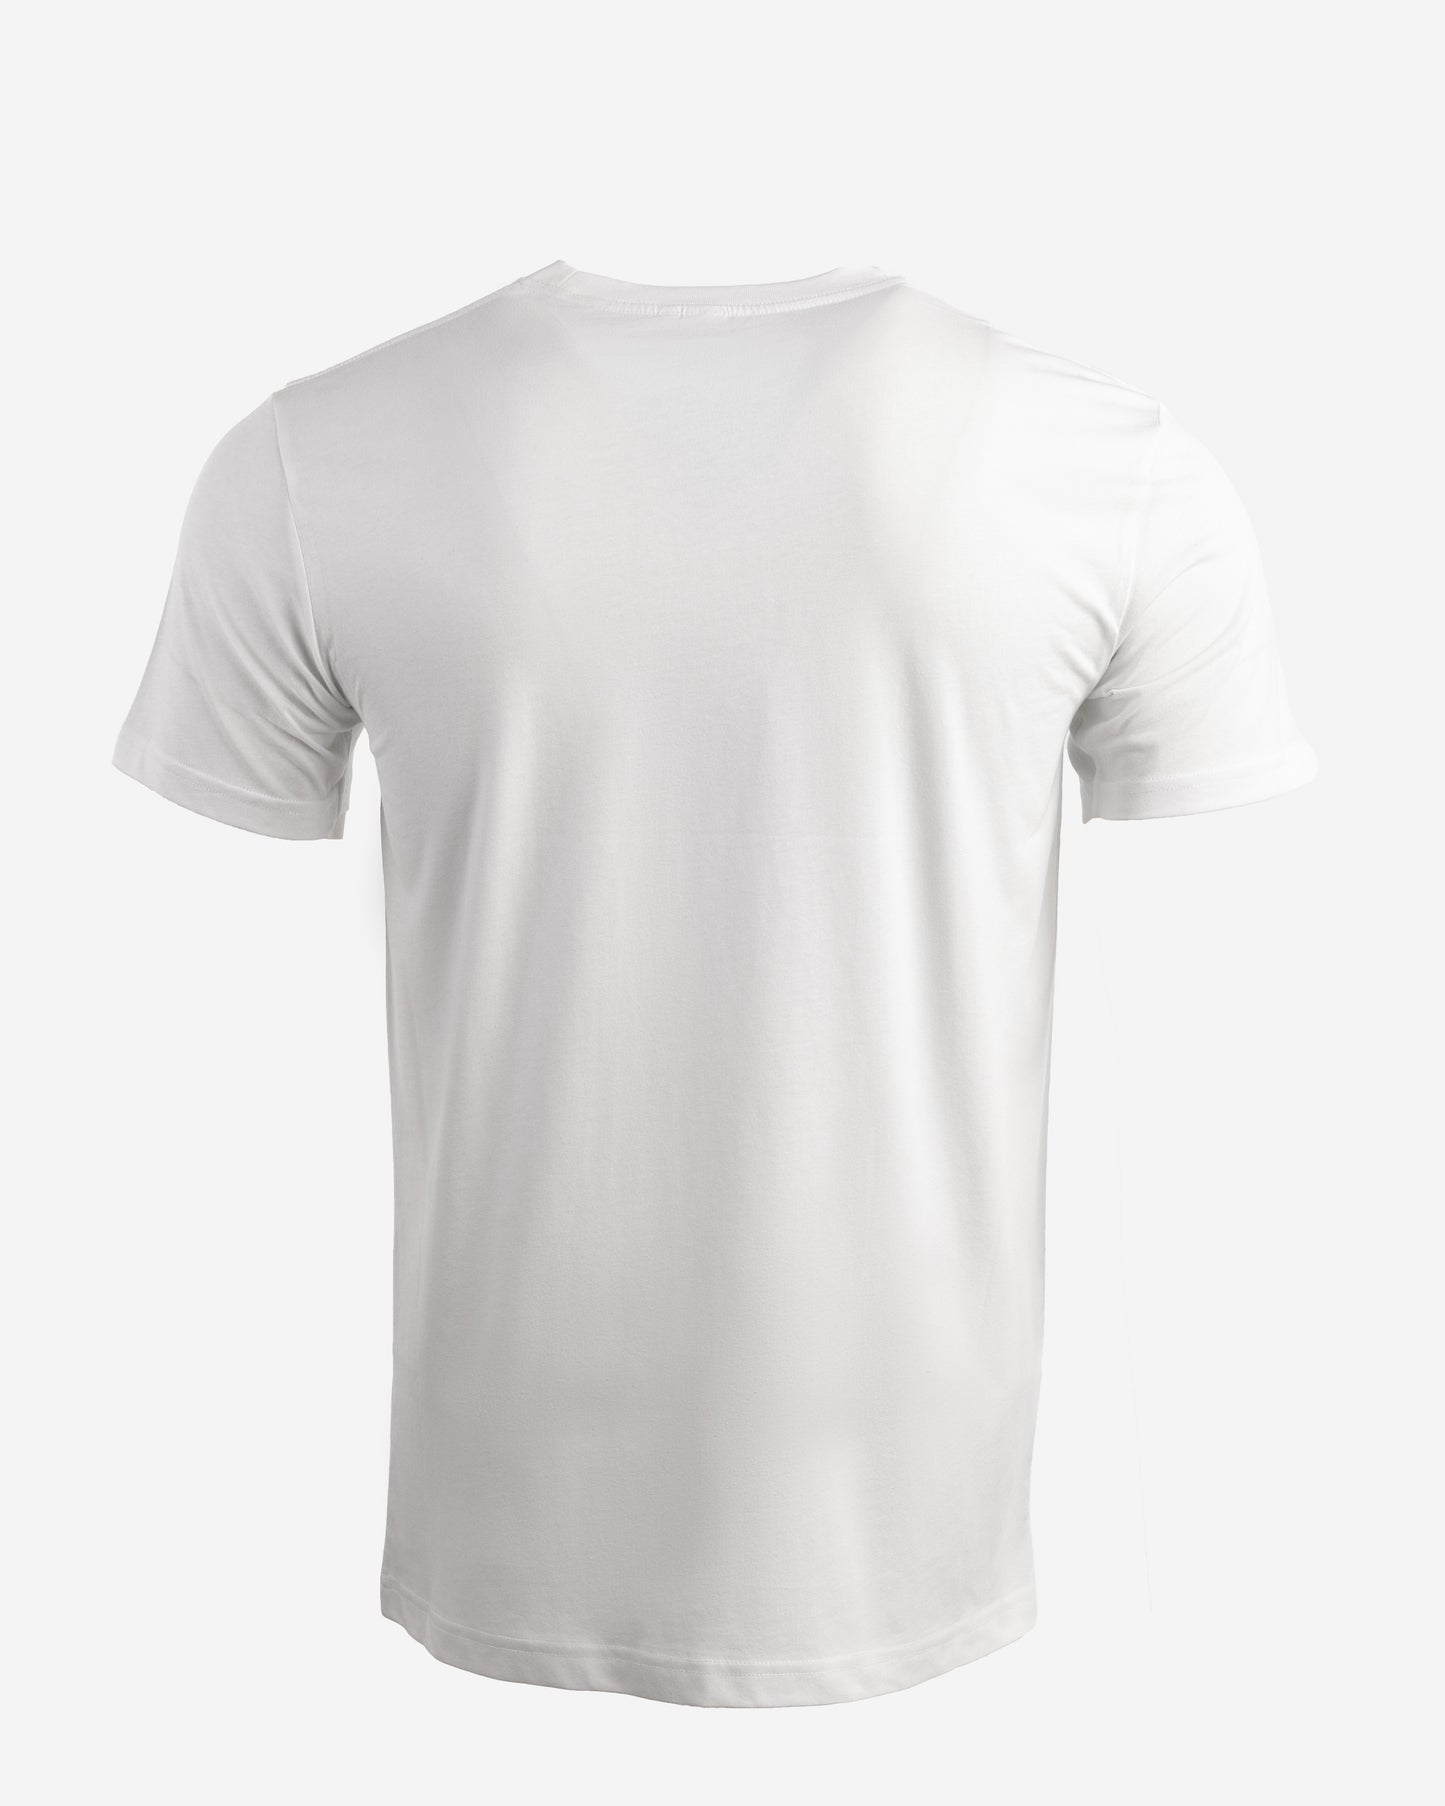 Lavos Men's Short Sleeve T-shirt - 80% BCI Cotton and 20%Polyester